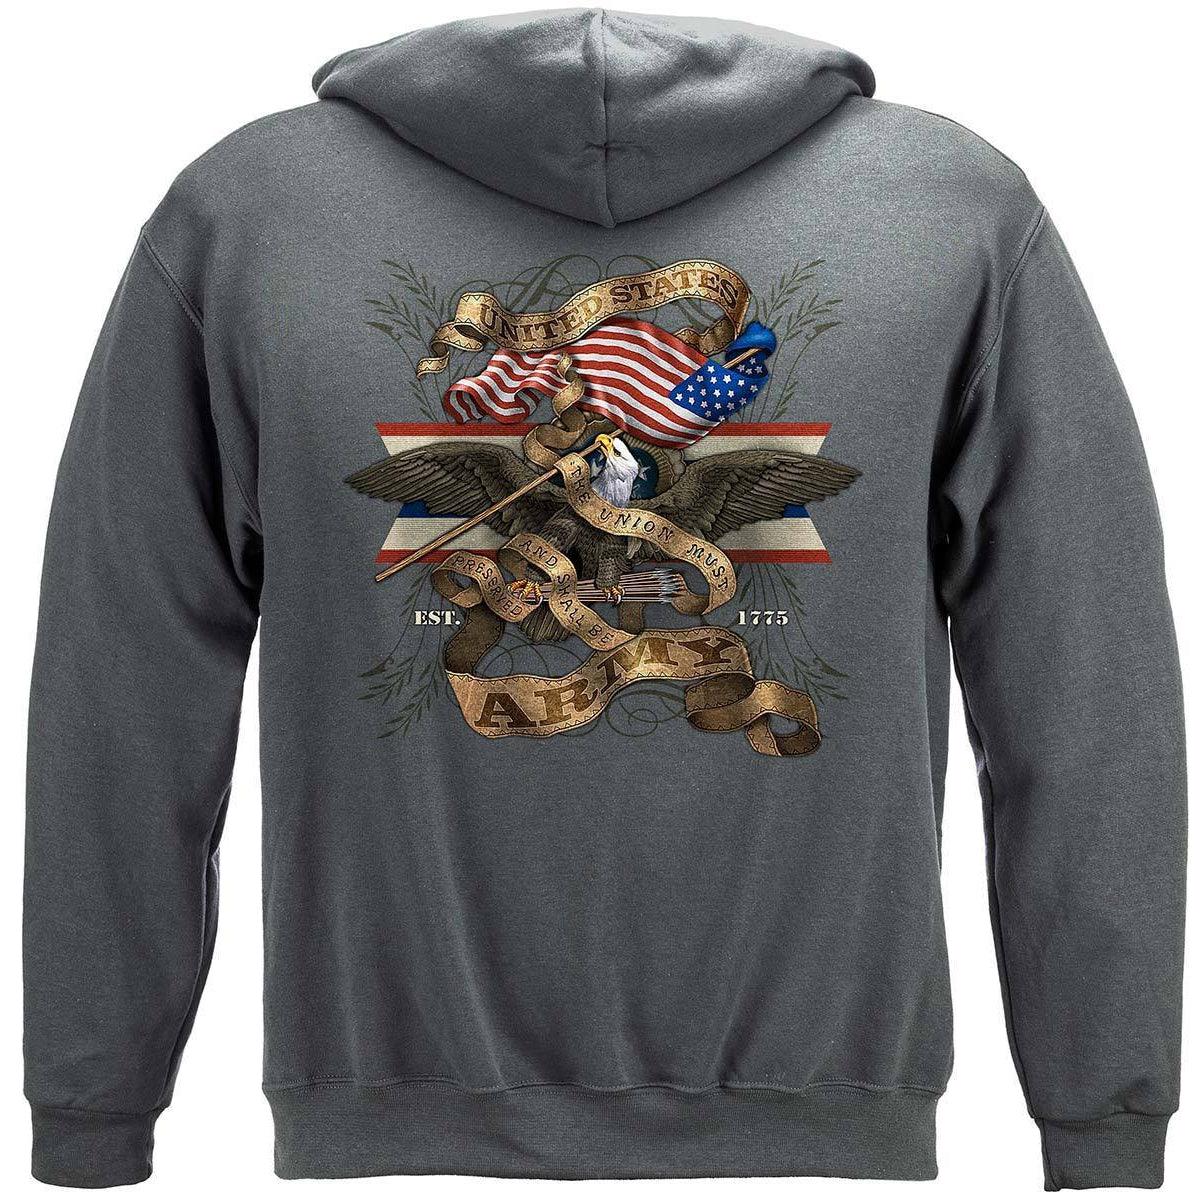 Army Eagle Antique This We'll Defend Premium Long Sleeve - Military Republic